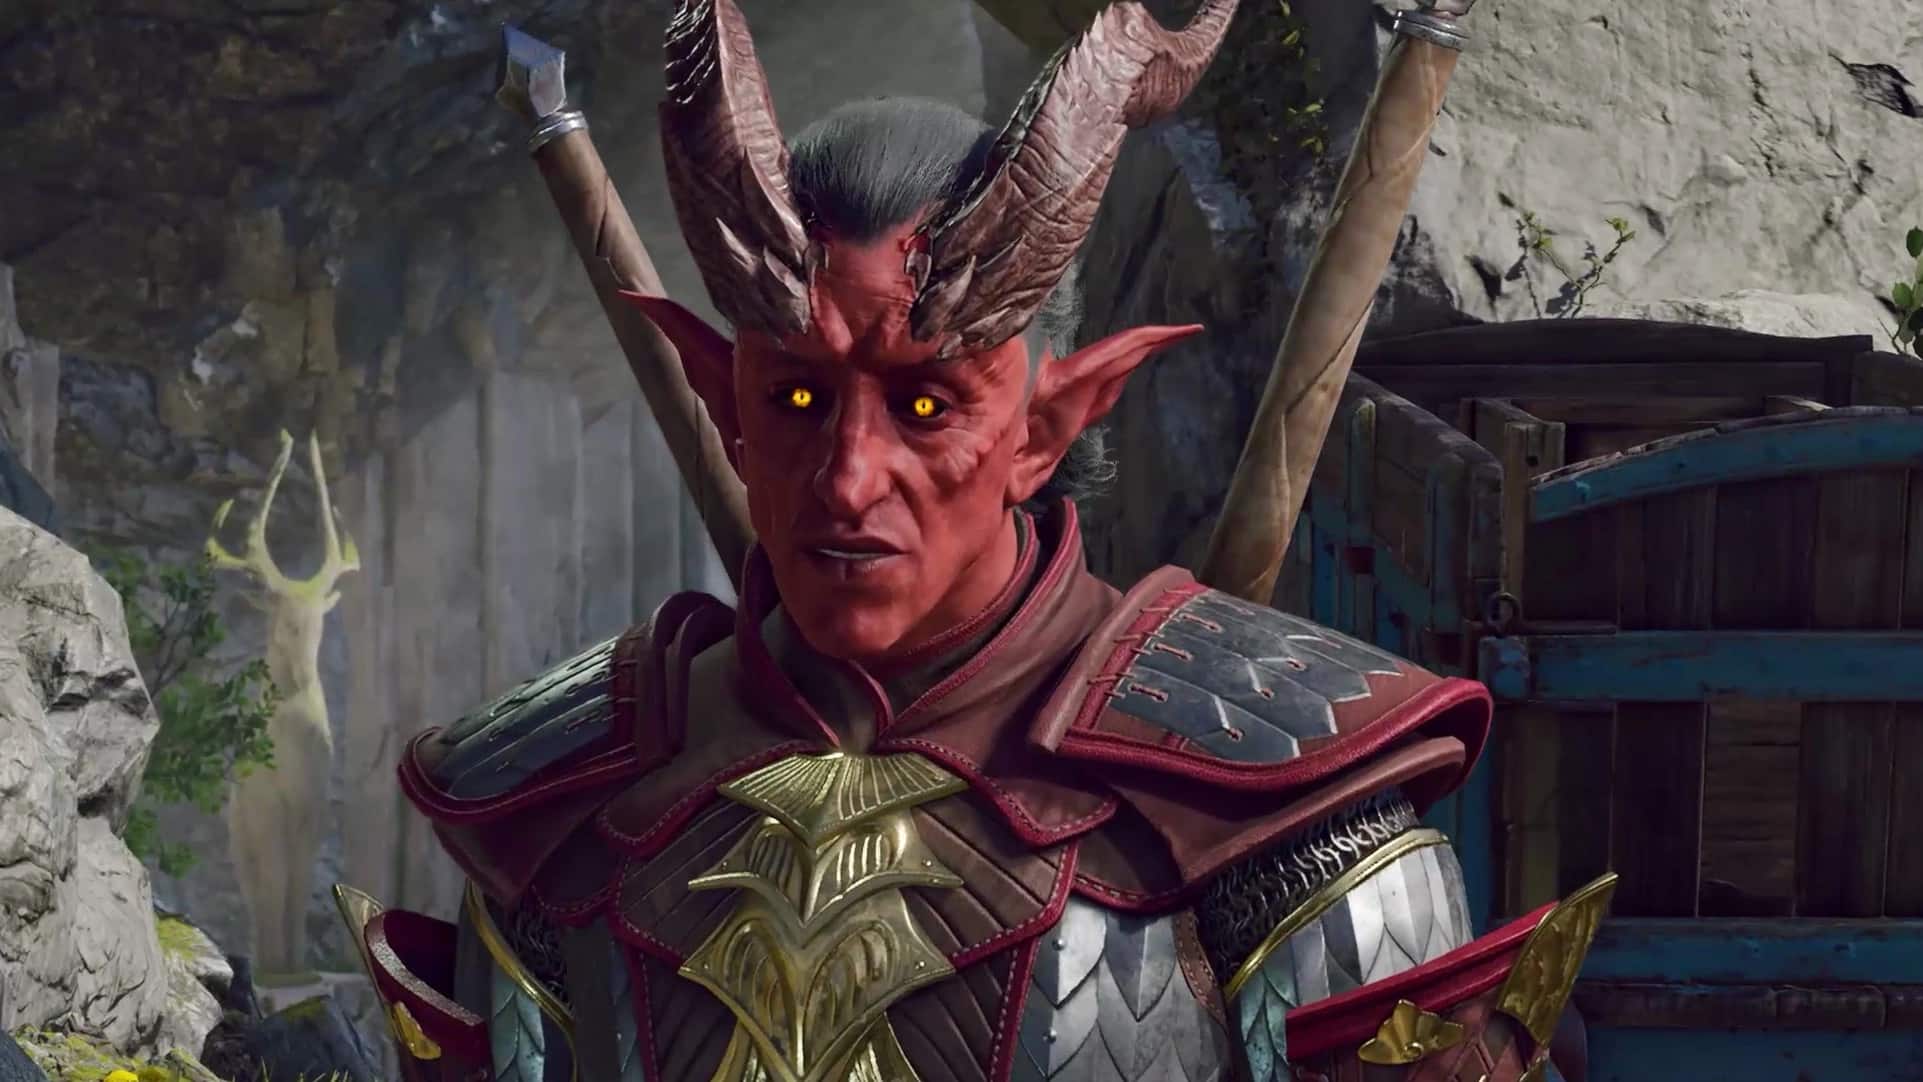 Baldur's Gate 3 will be released on Xbox Series in December - the